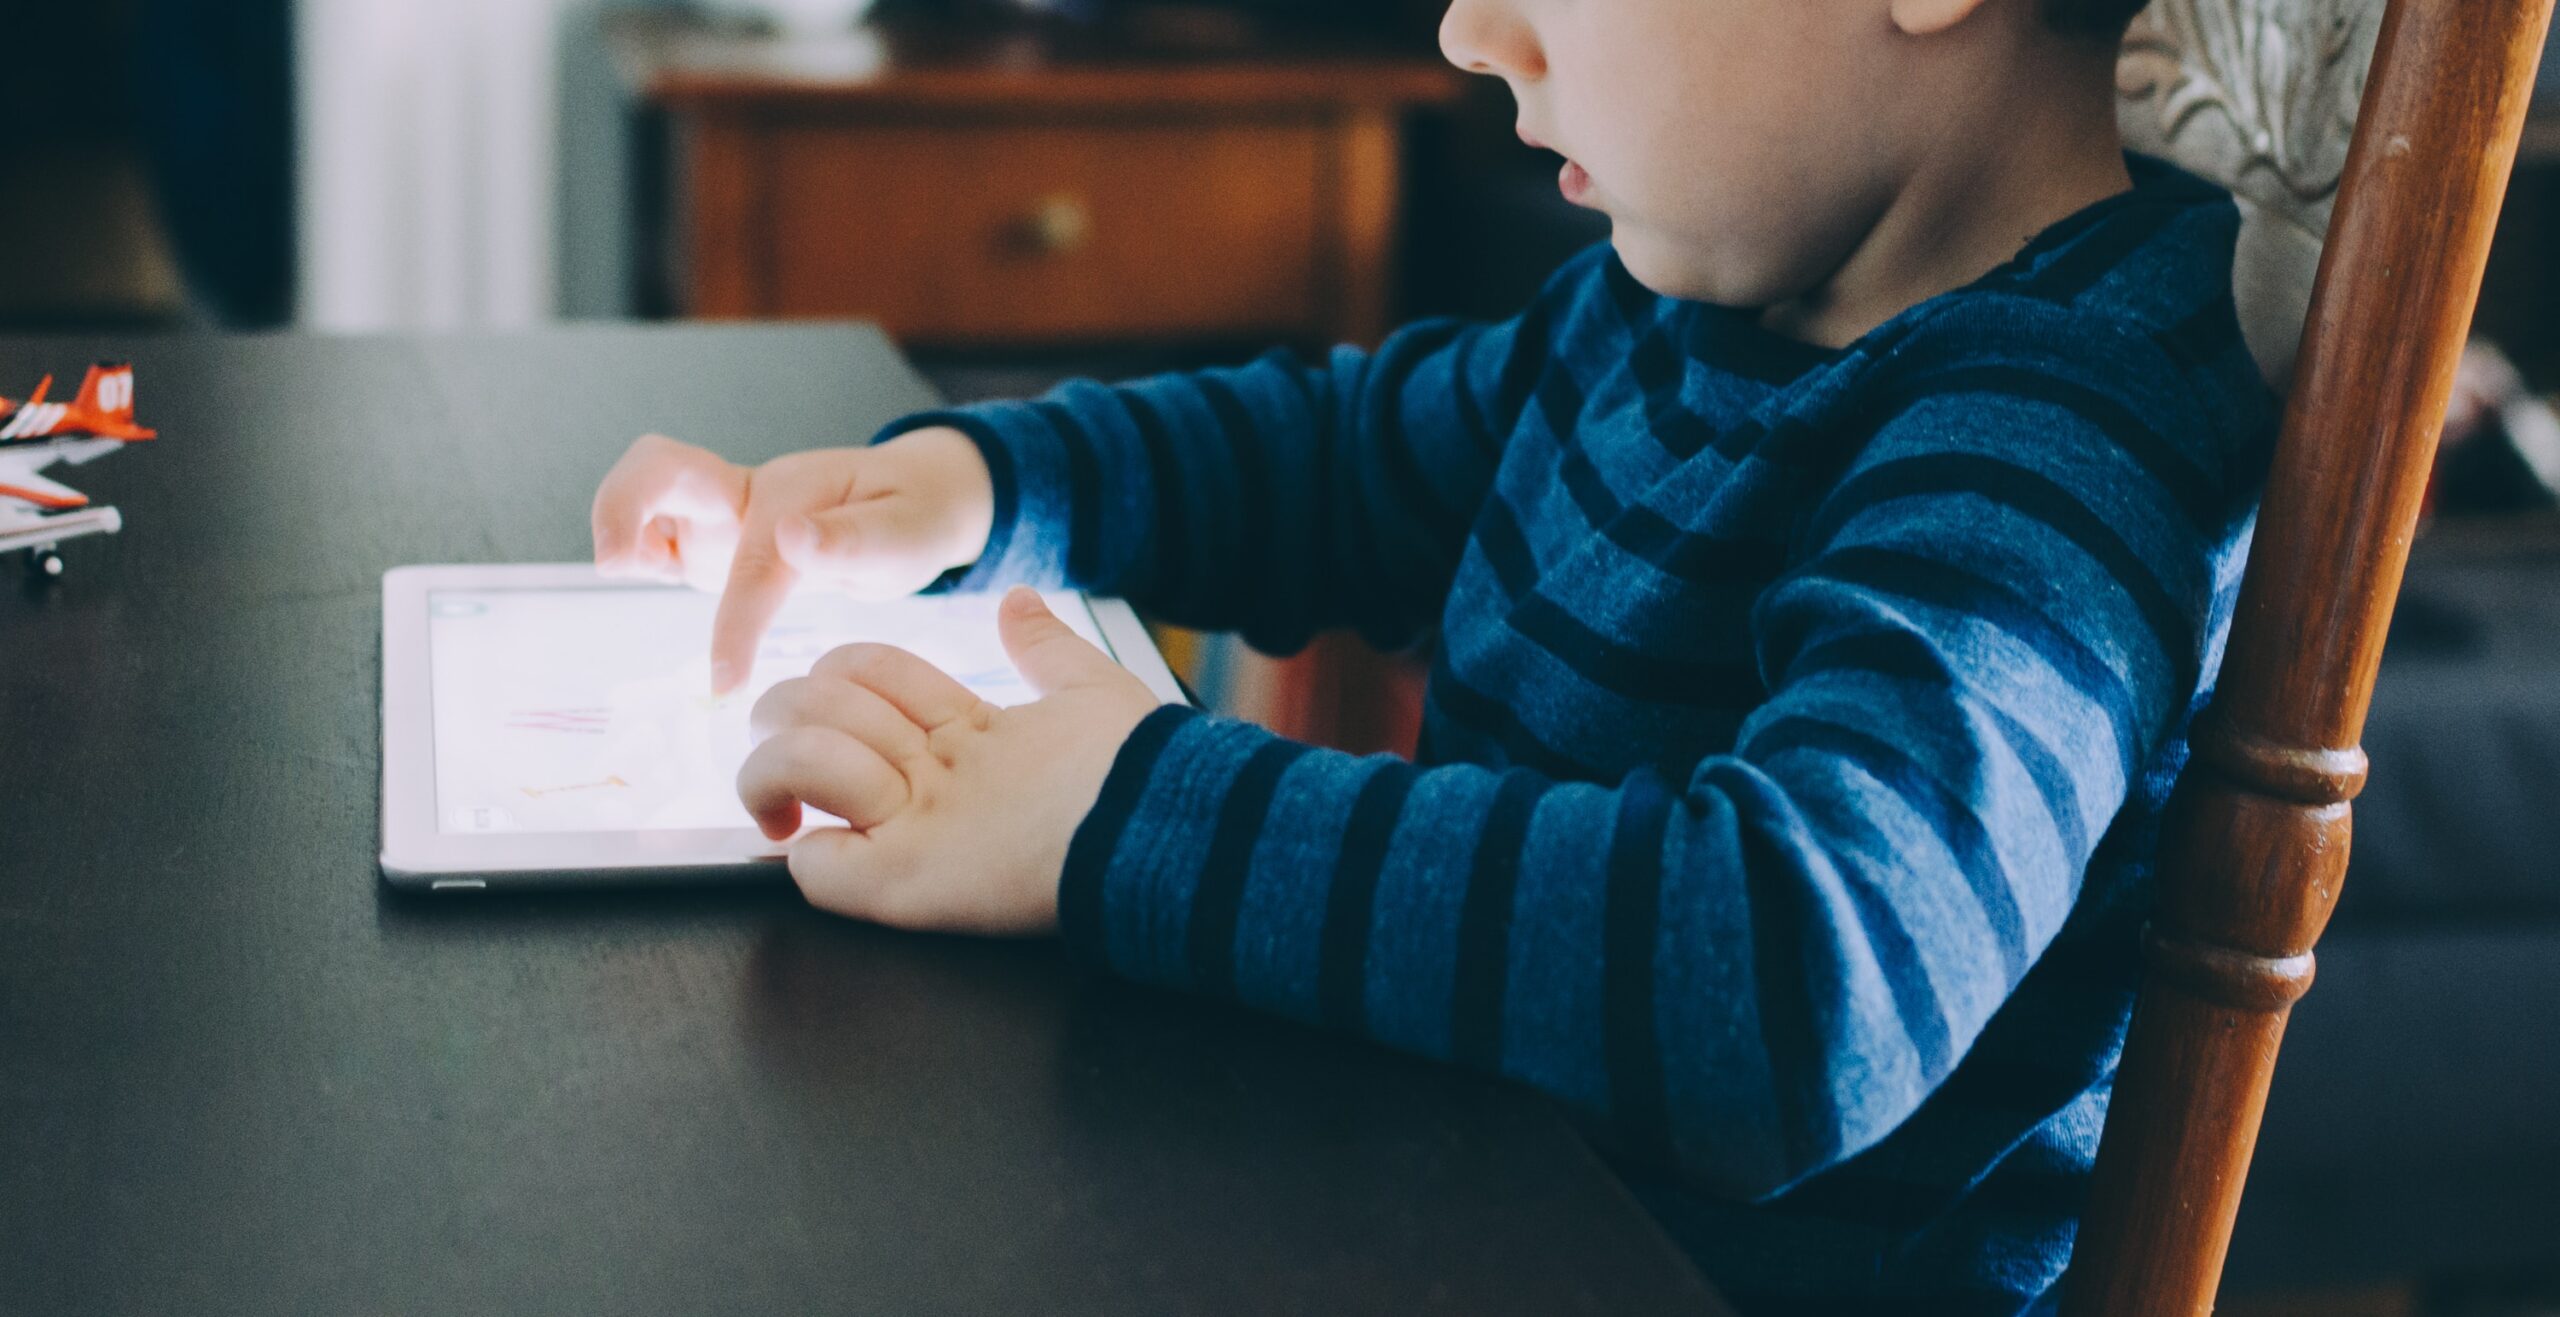 How to Manage Your Child’s Screen Time Without Resentment